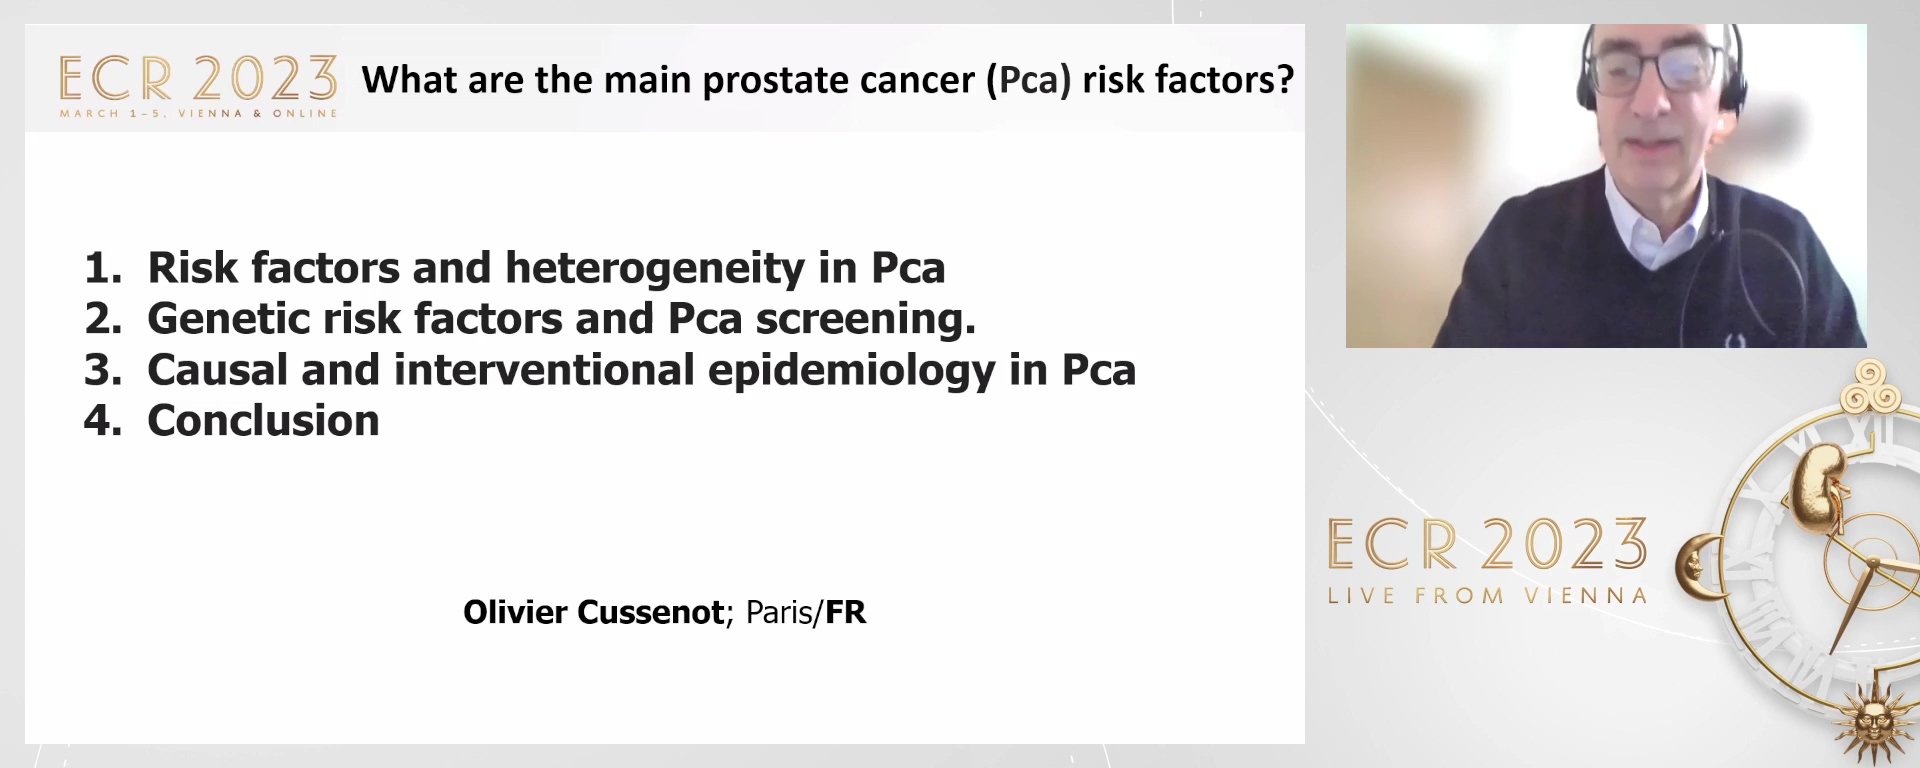 What are the main prostate cancer risk factors?